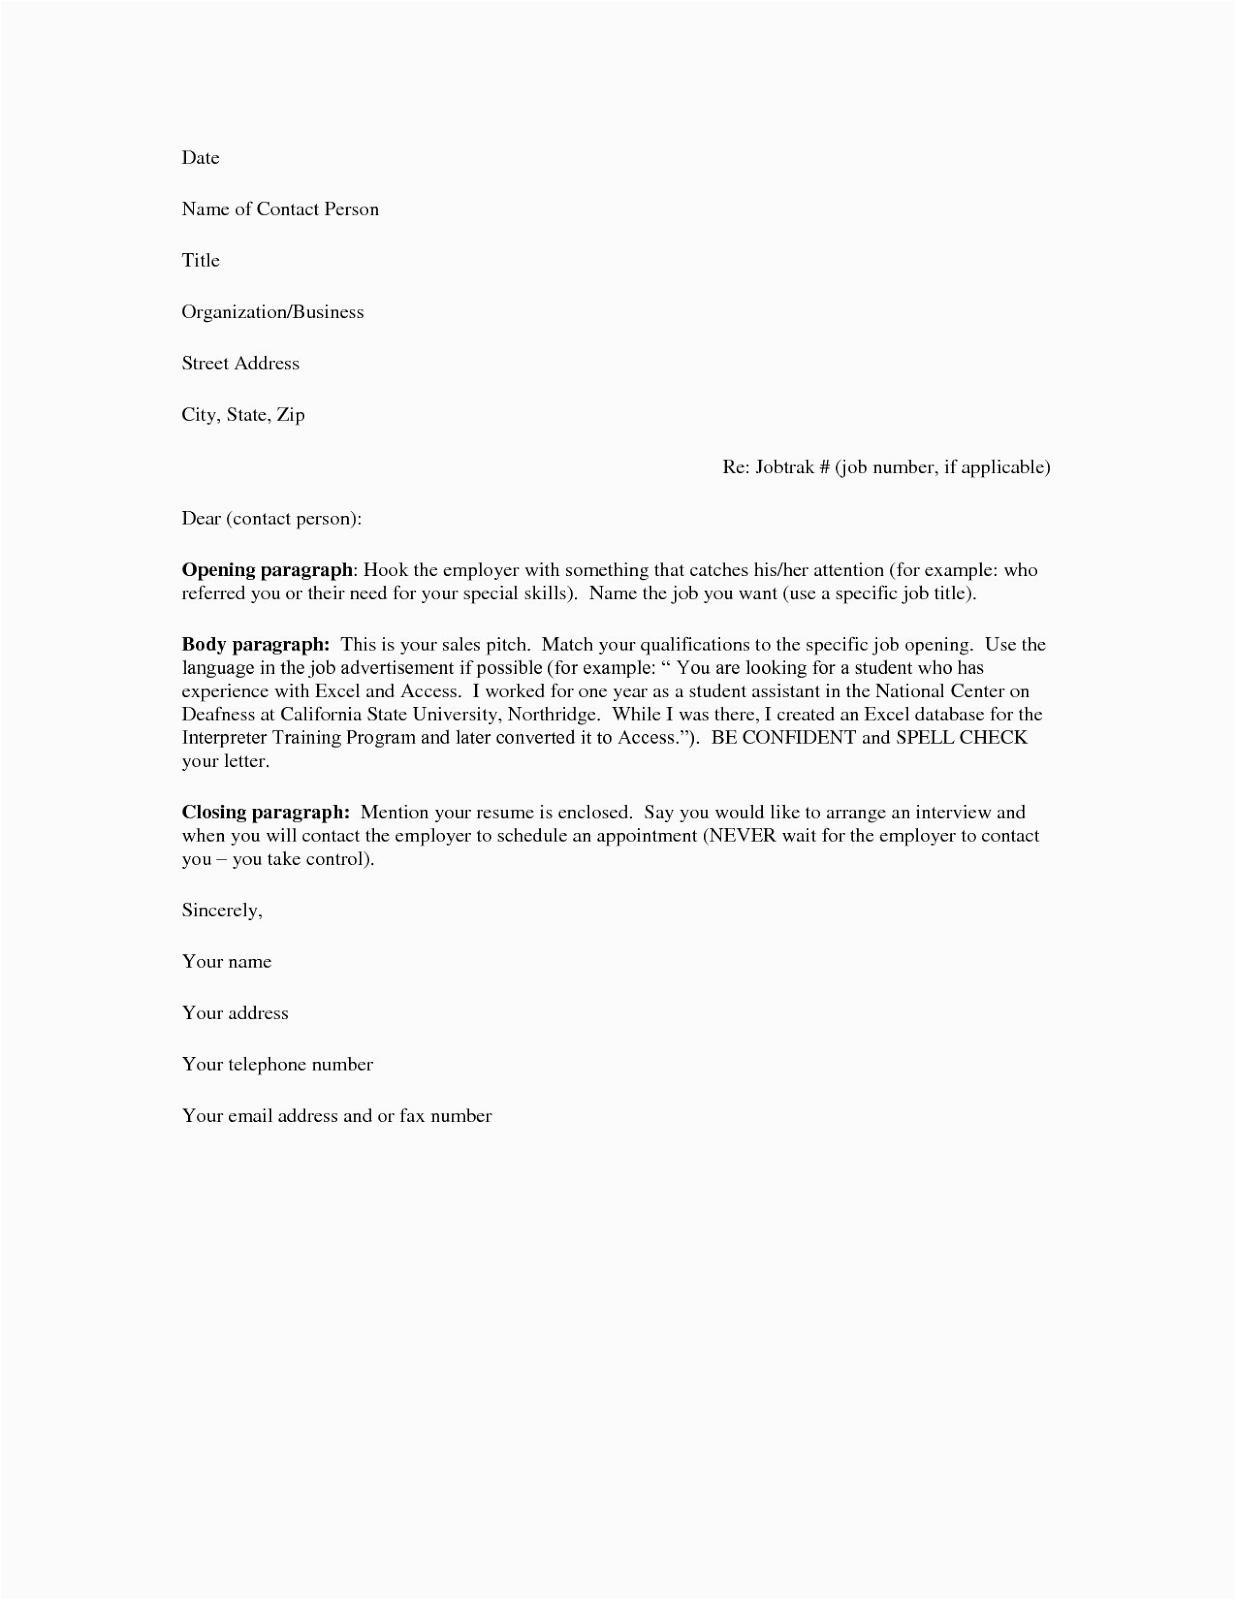 Free Printable Sample Cover Letters for Resumes Free Cover Letter Samples for Resumes